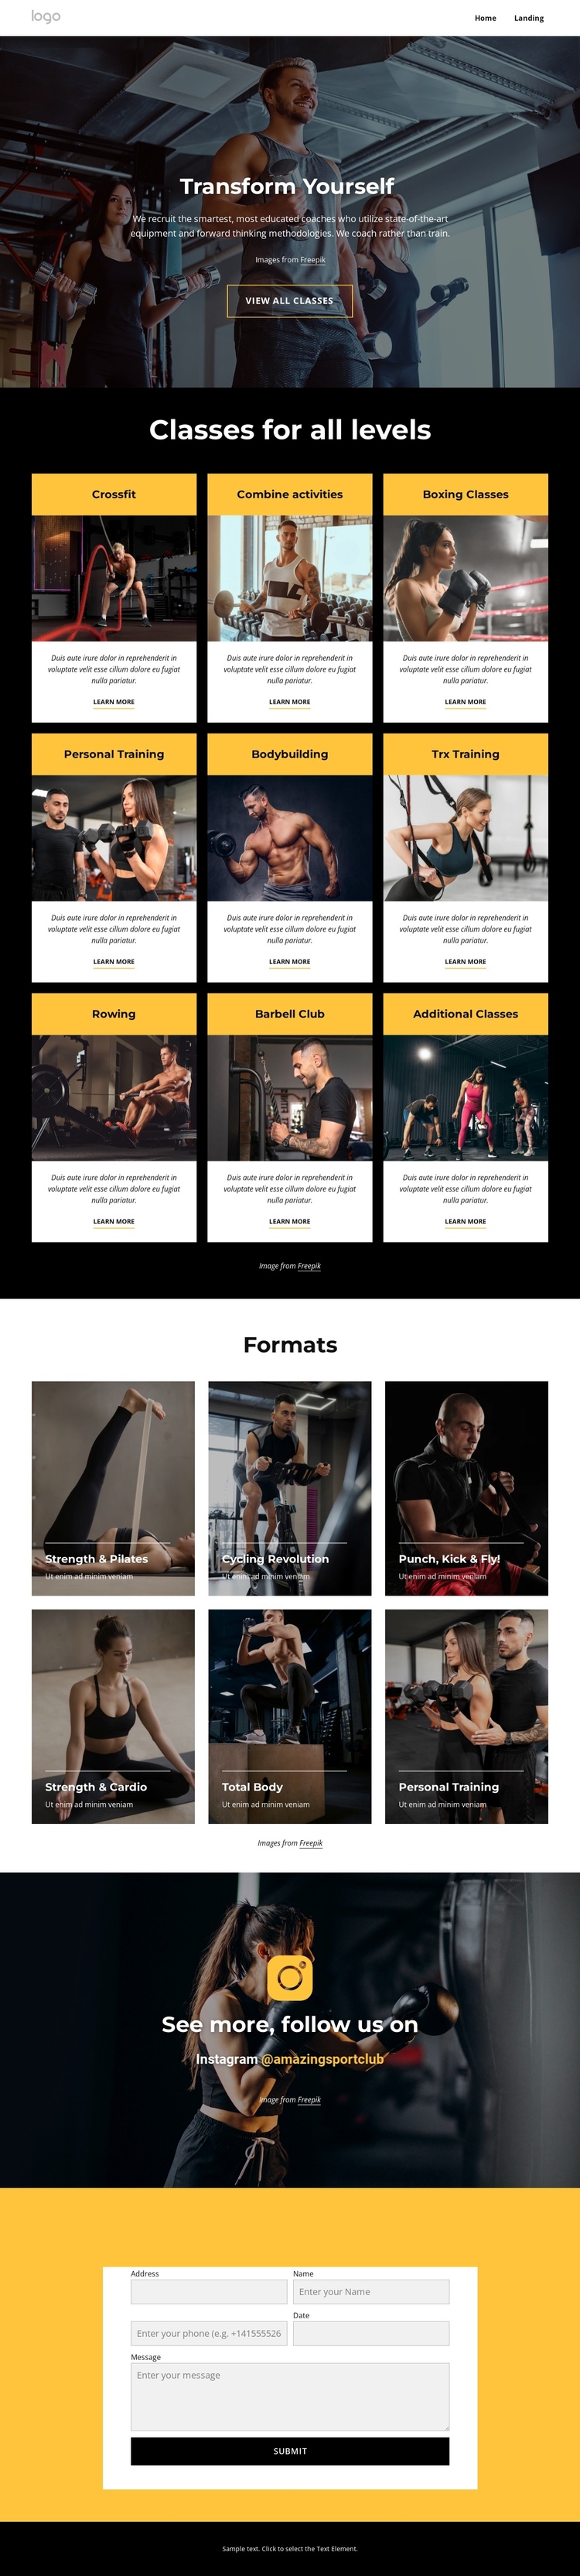 Fitness classes, indoor pools One Page Template